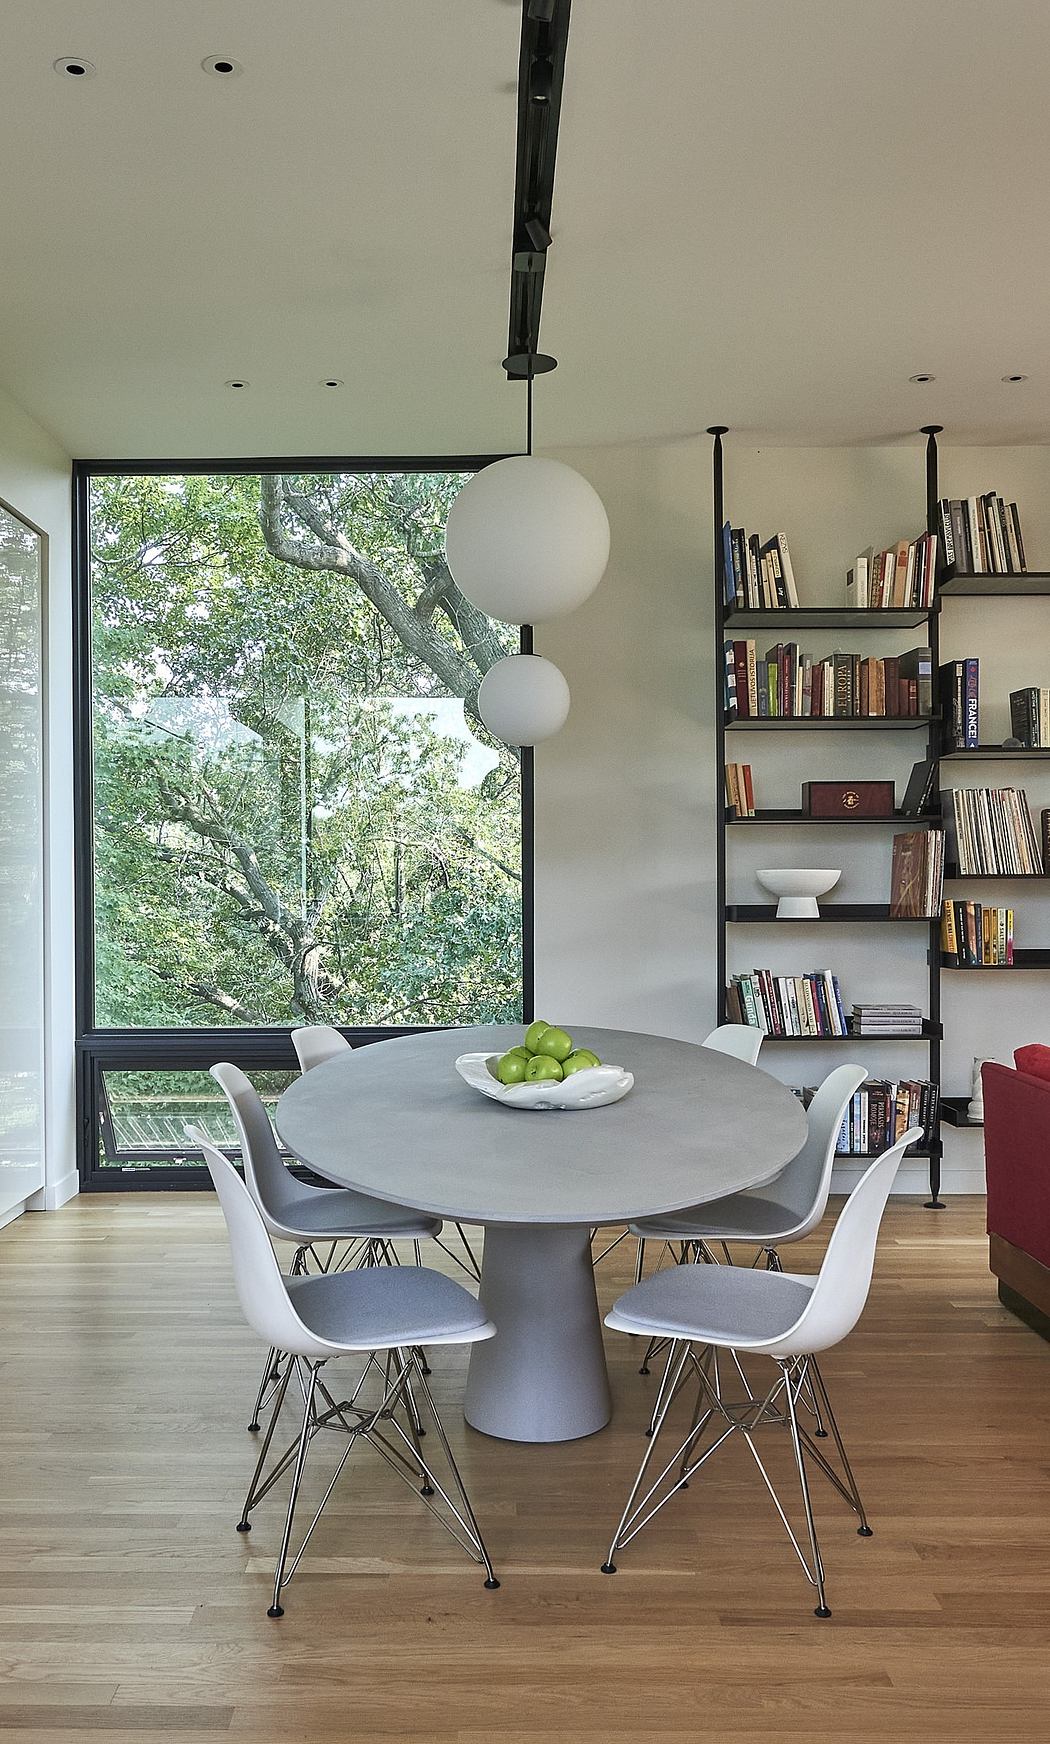 Modern dining area with bookshelves, large window, and unique pendant light.